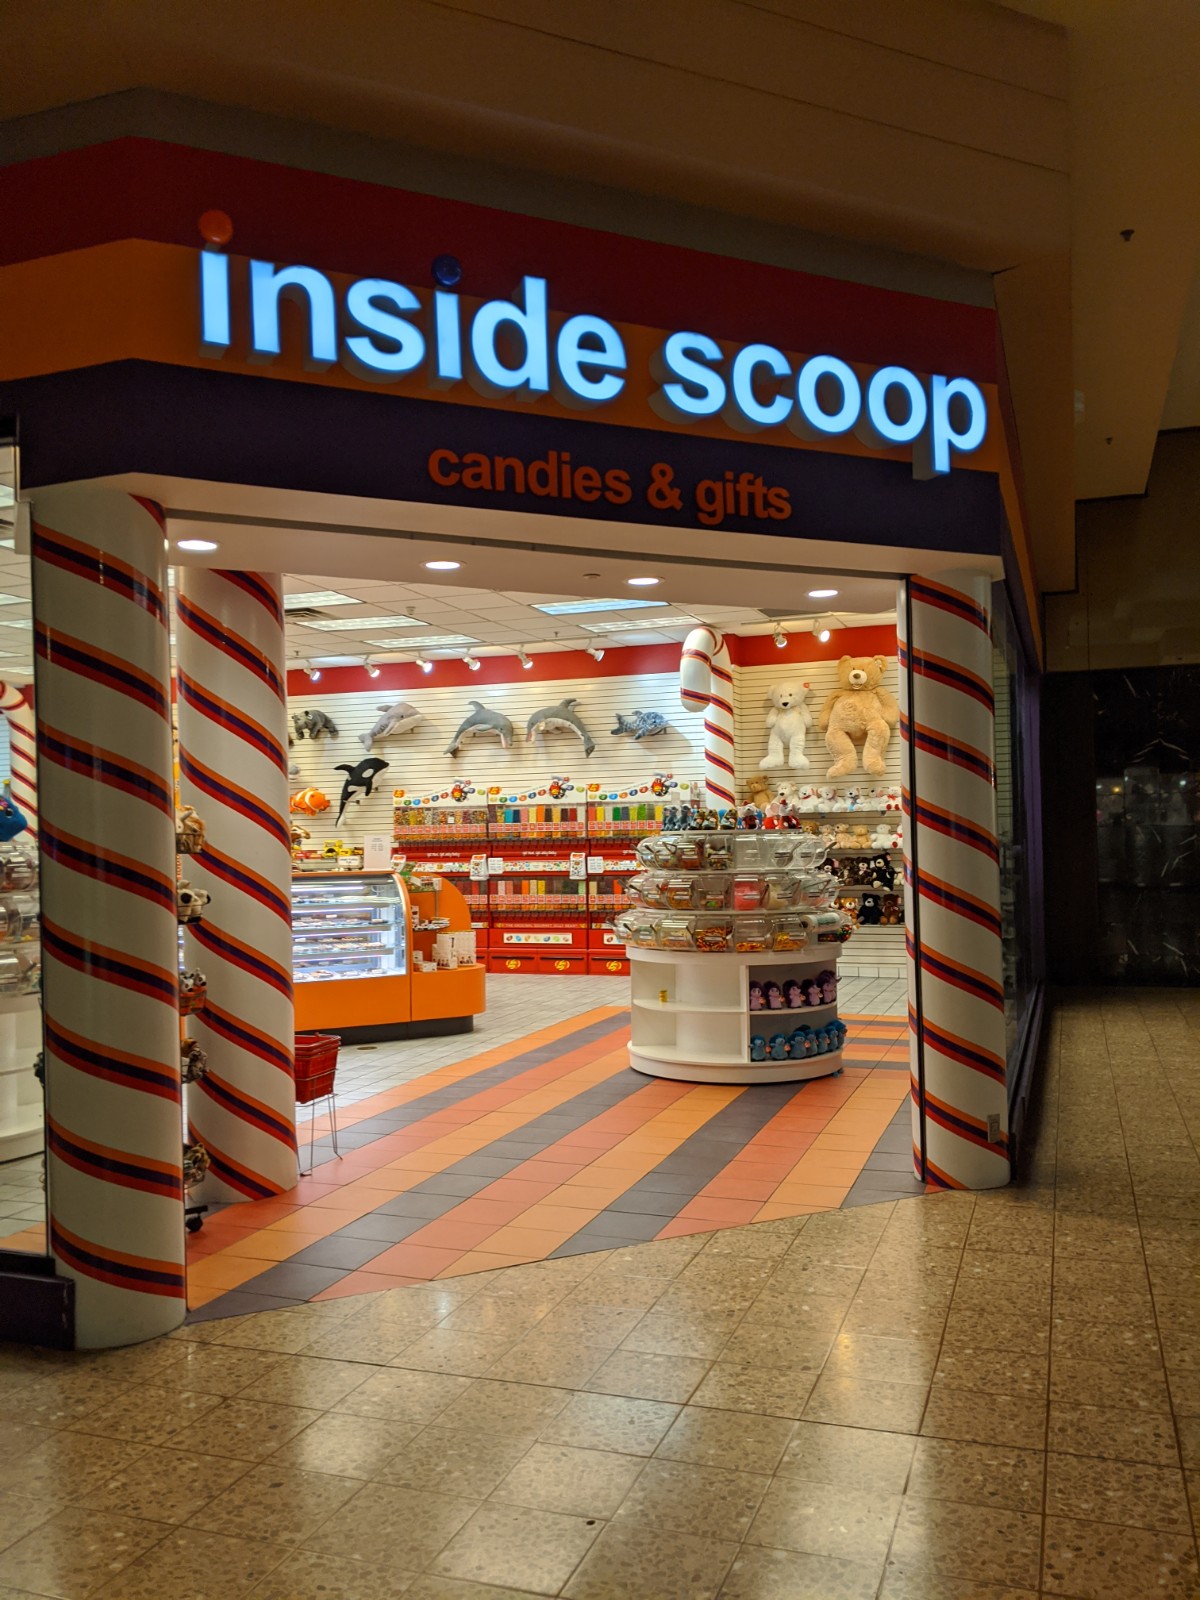 Inside Scoop Candies & Gifts